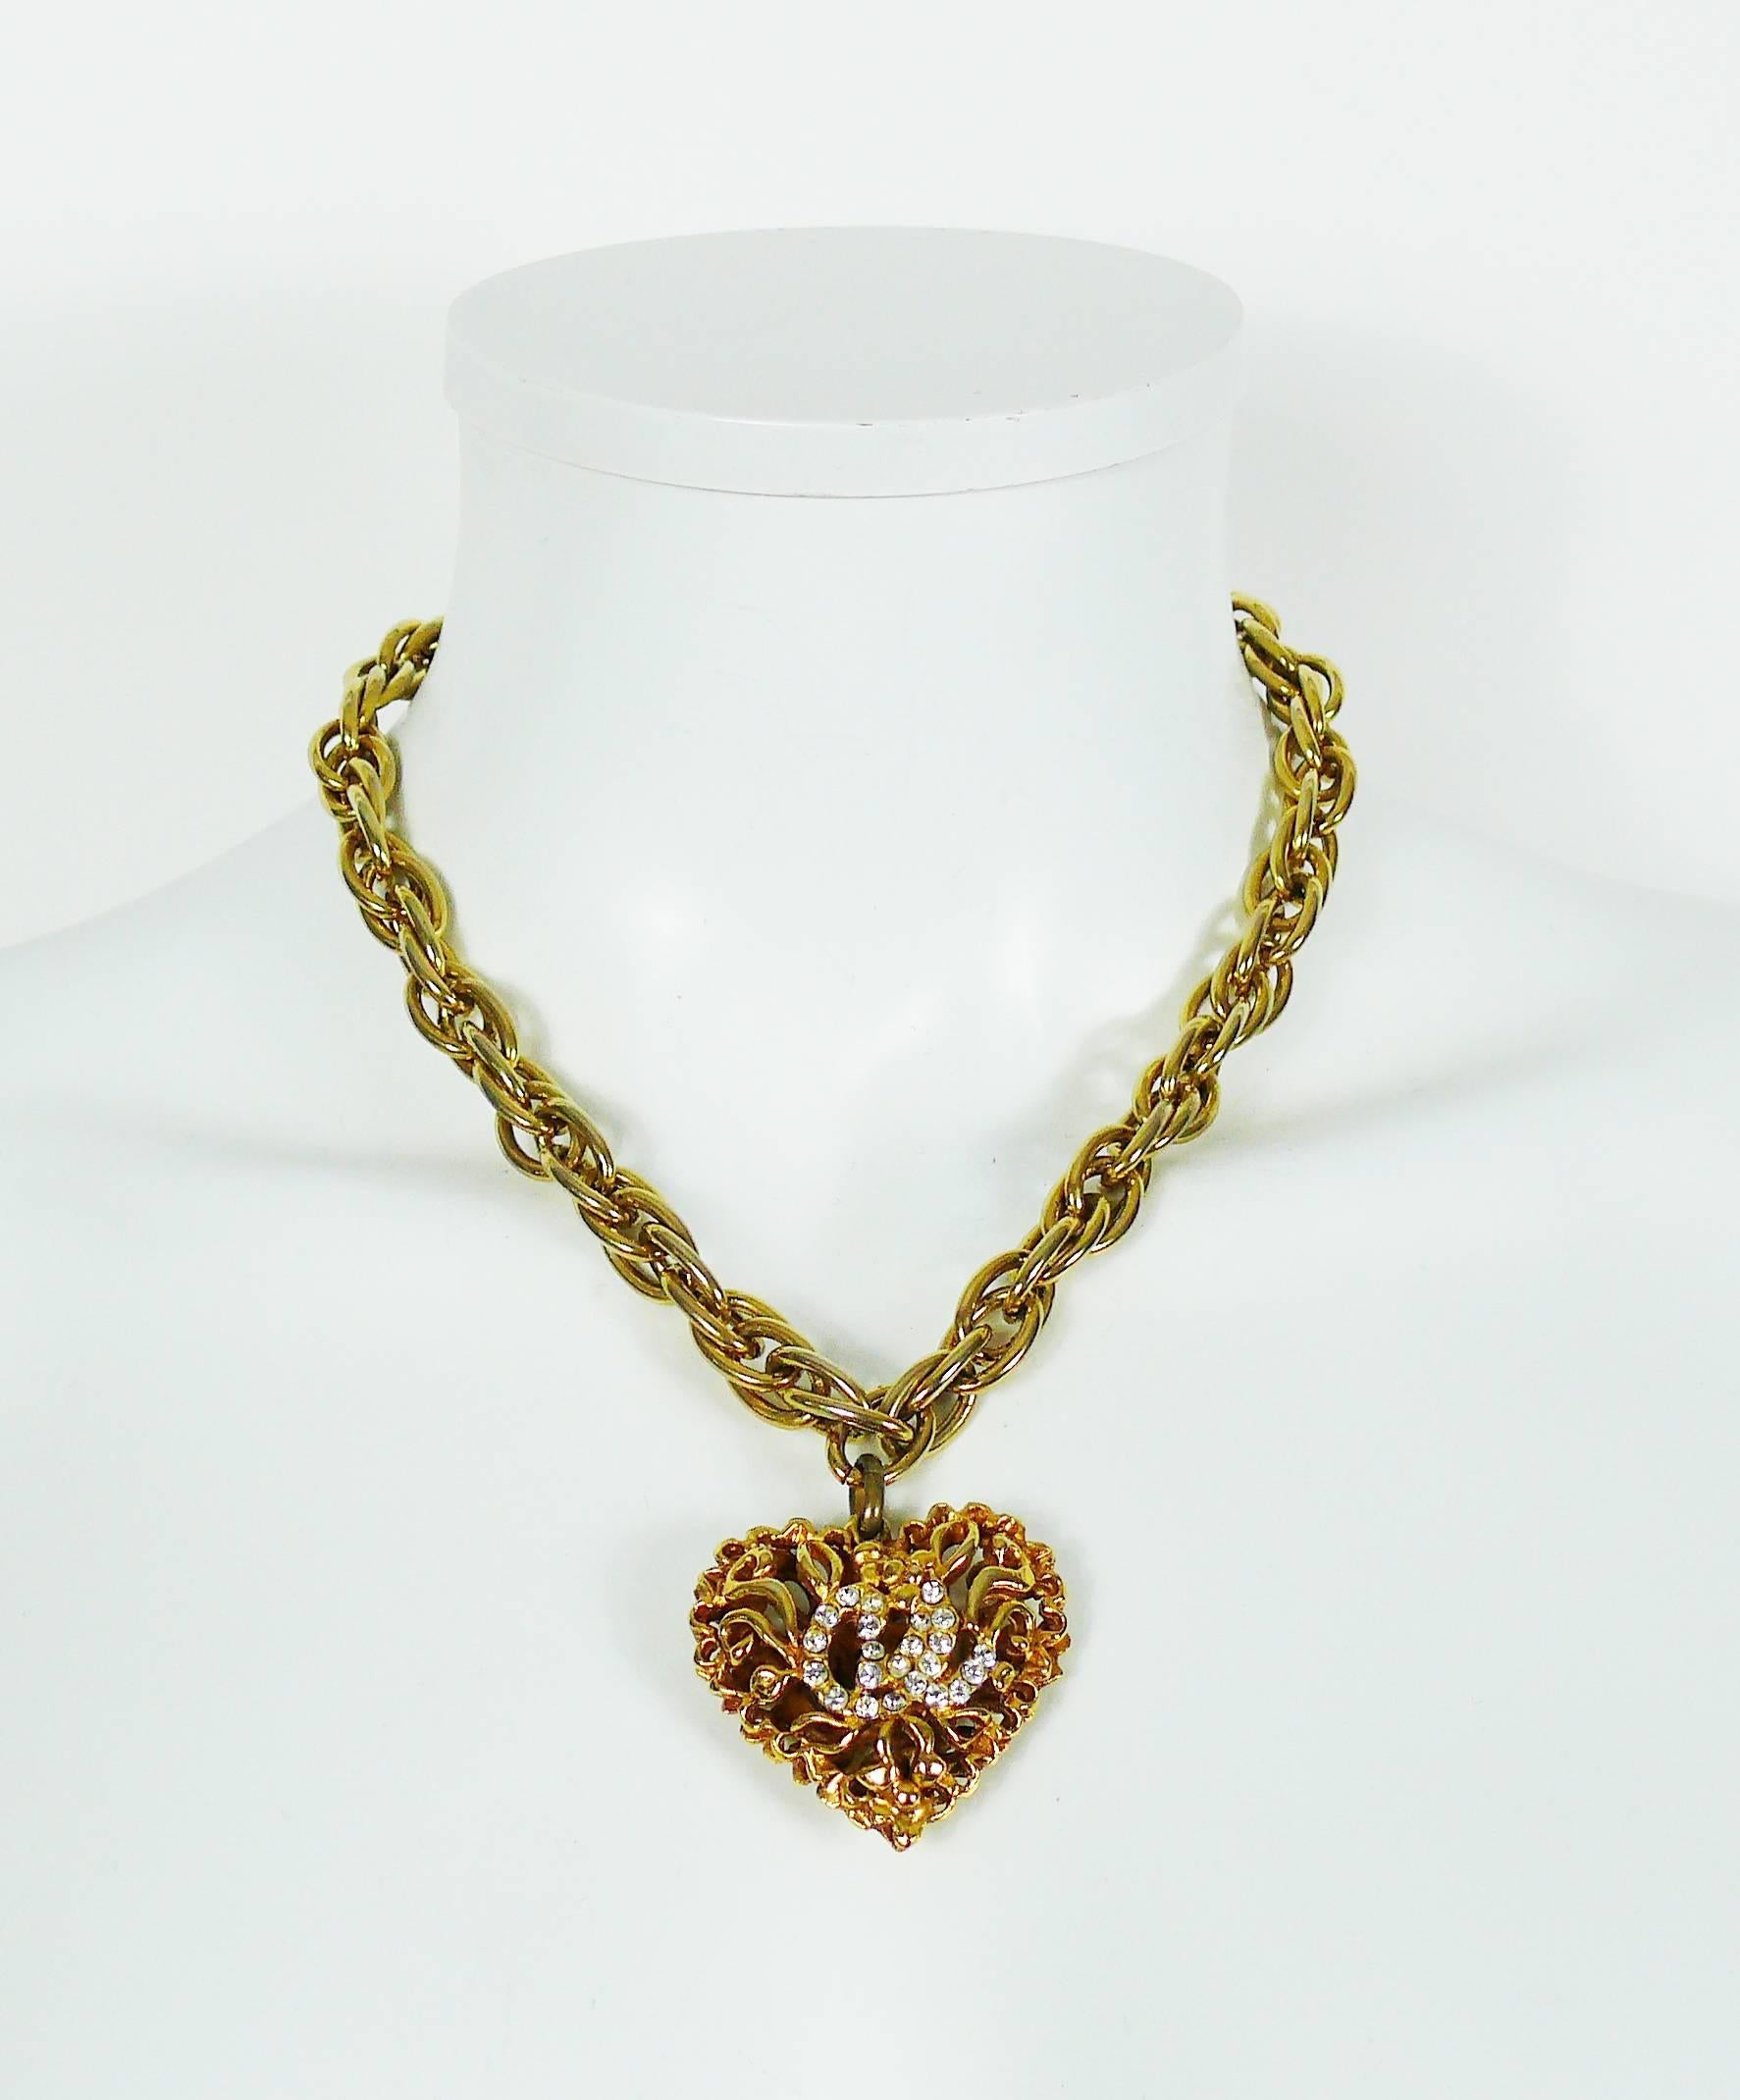 CHRISTIAN LACROIX vintage gold toned necklace featuring a chunky chain with an openwork heart pendant embellished with clear crystals and CL monogram.

Hook clasp.
Extension chain.

Indicative measurements : chain total length approx. 45 cm (17.72